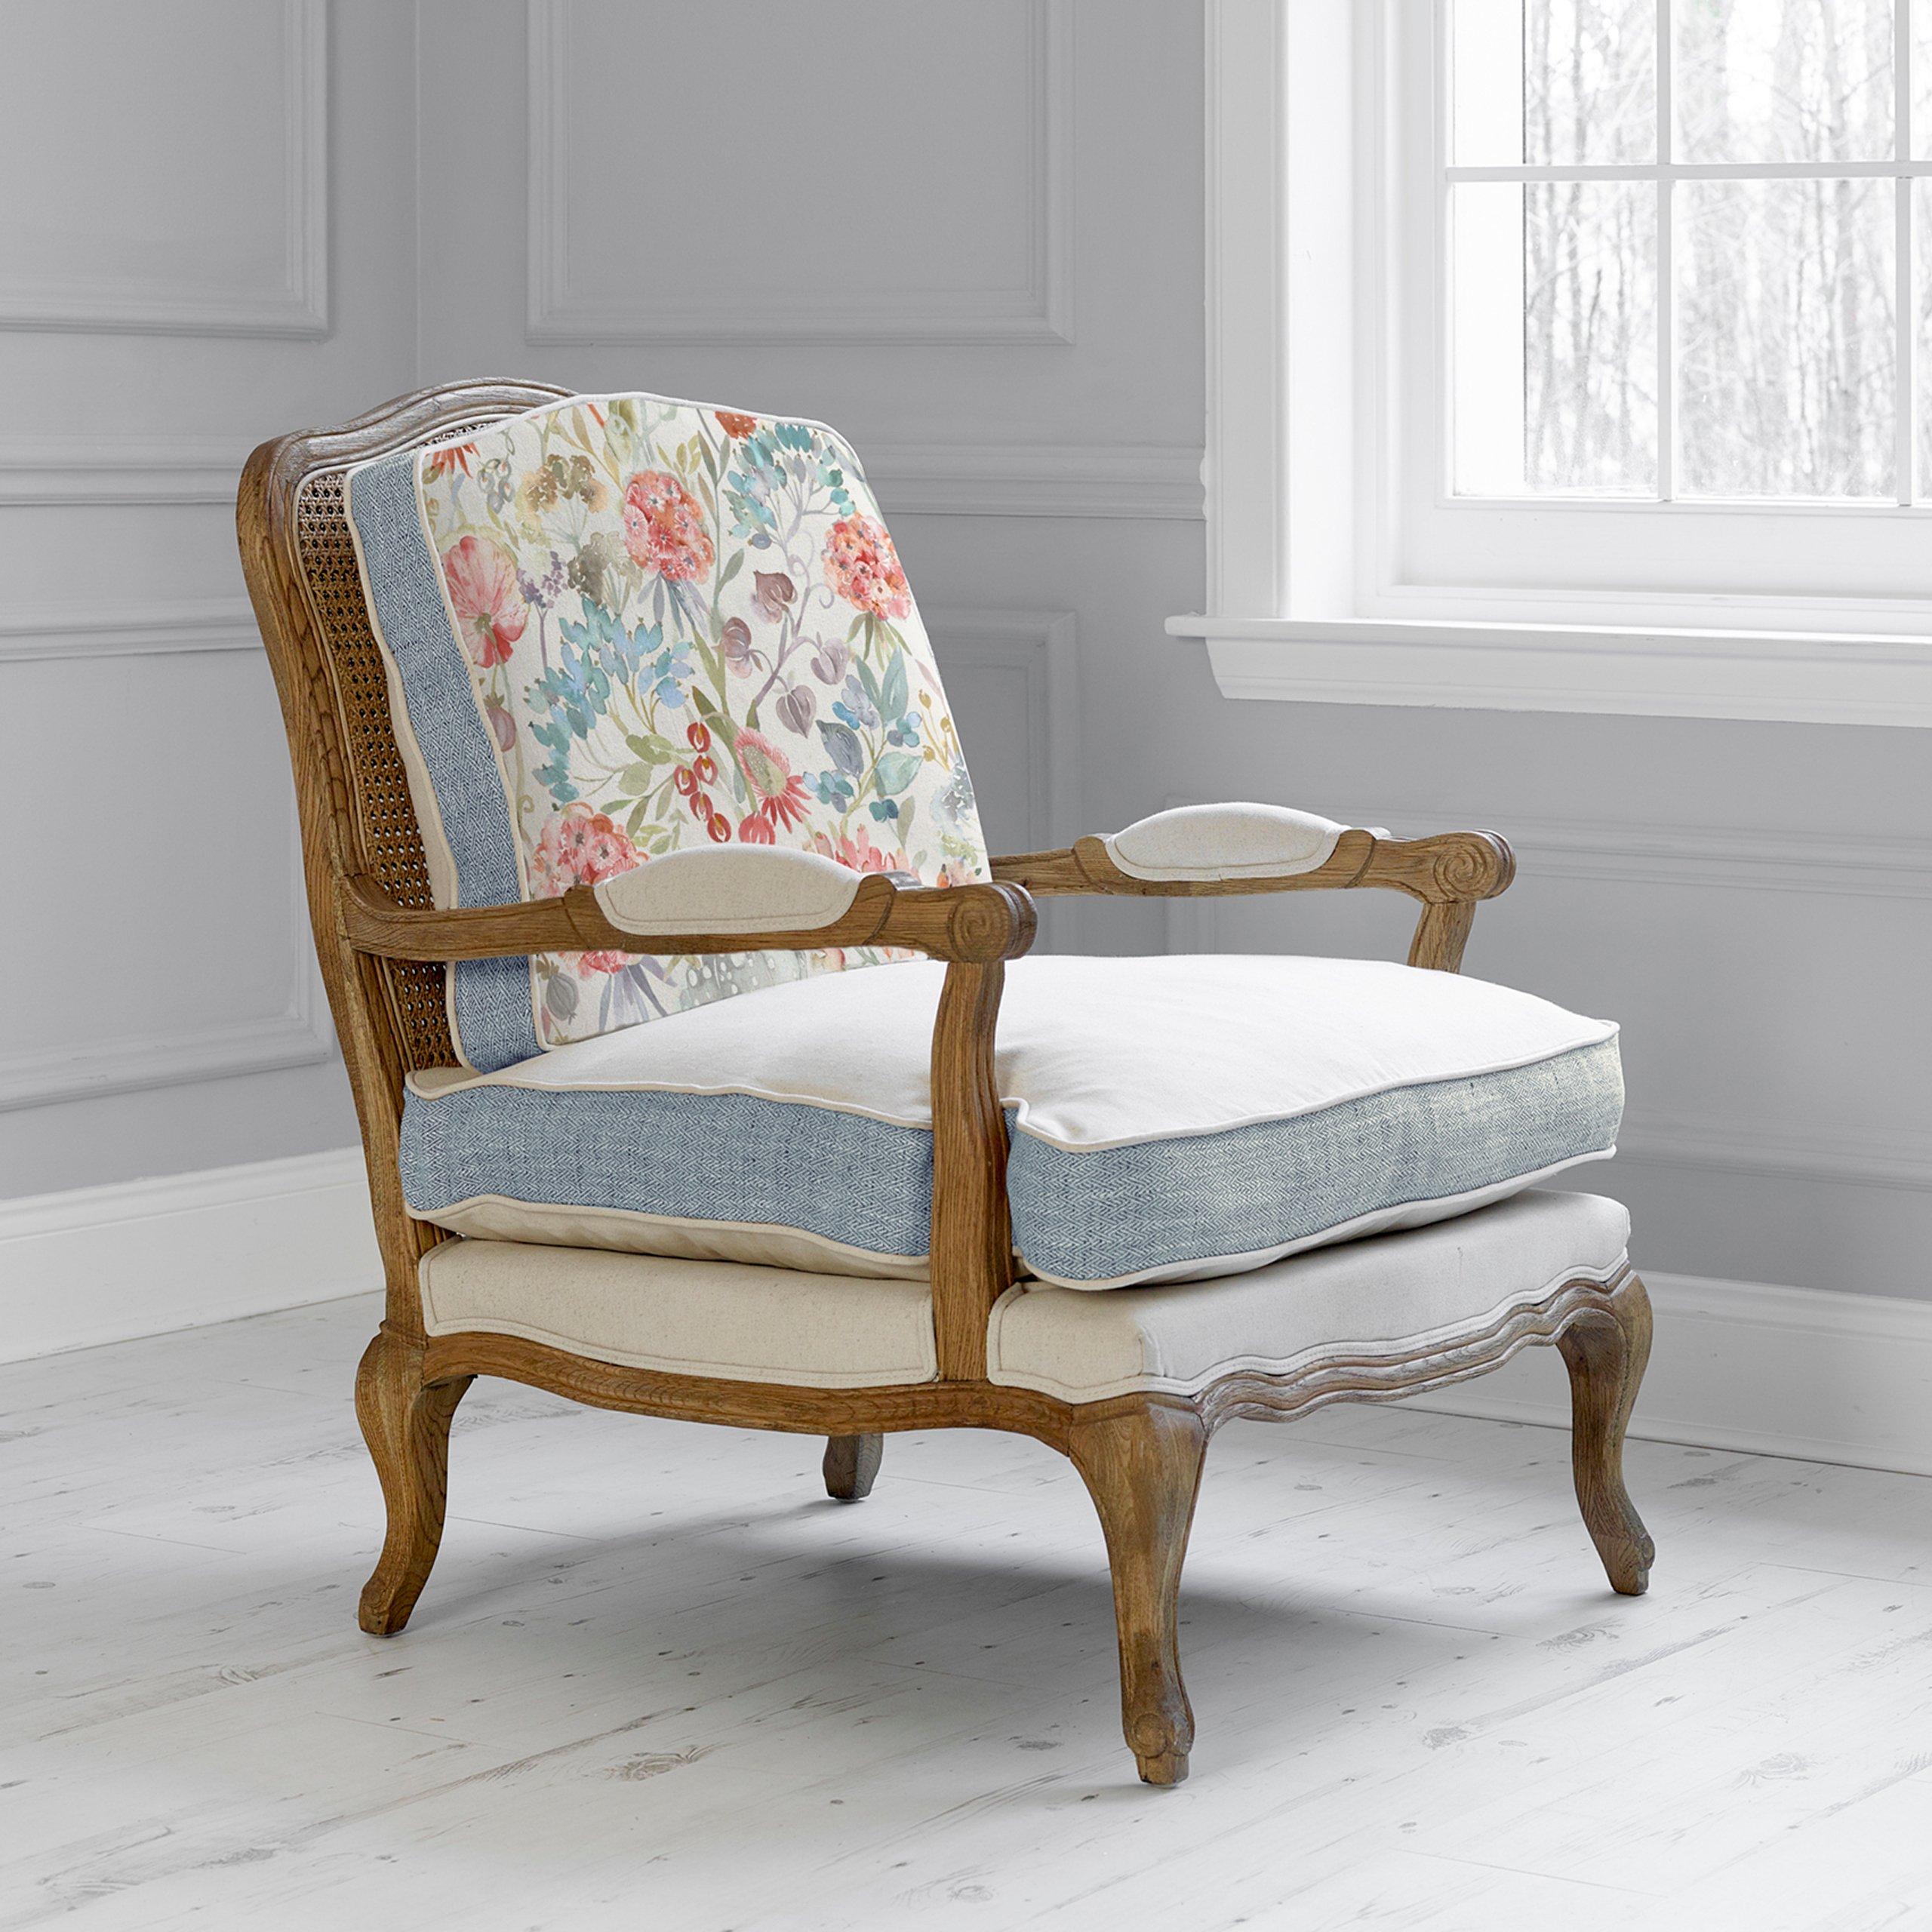 Florence Patrice Floral Country Chair